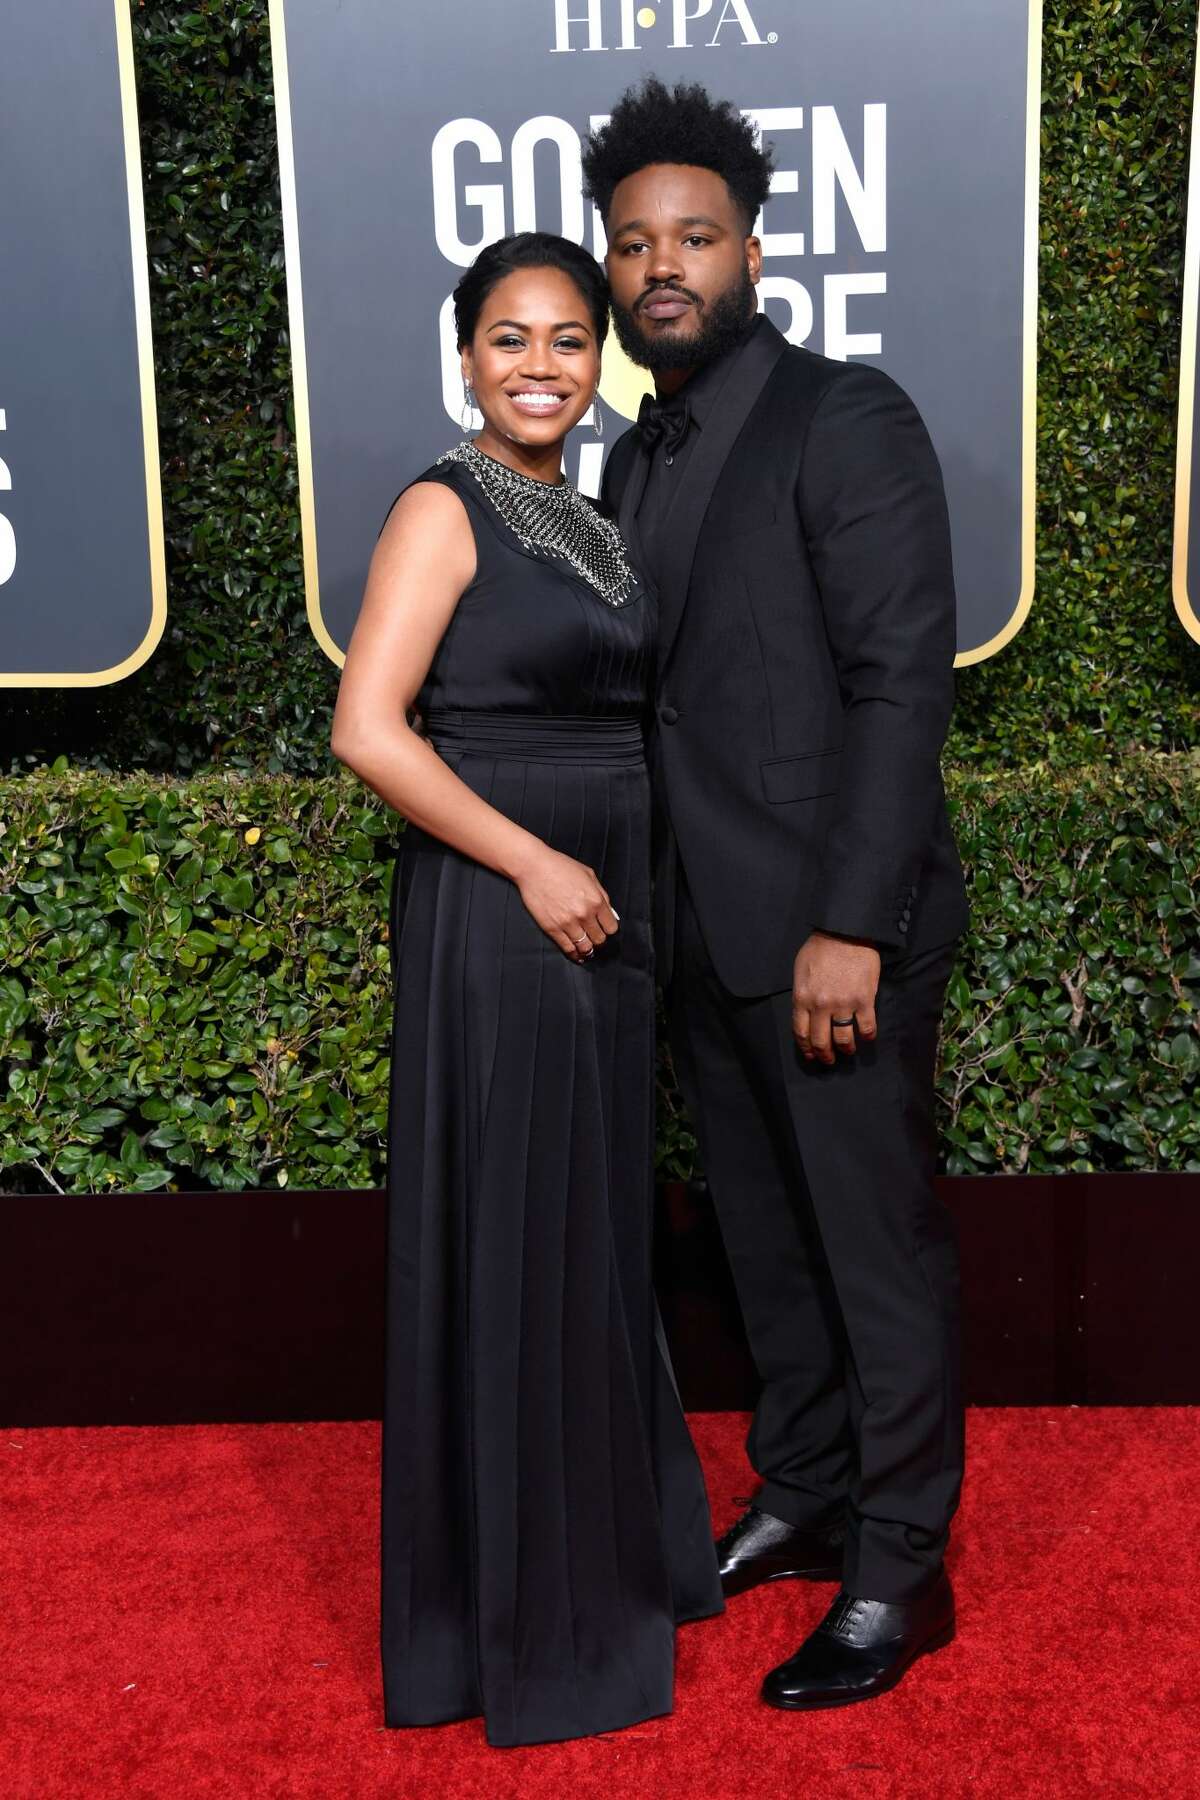 Zinzi Evans (L) and Ryan Coogler attend the 76th Annual Golden Globe Awards at The Beverly Hilton Hotel on January 6, 2019 in Beverly Hills, California.